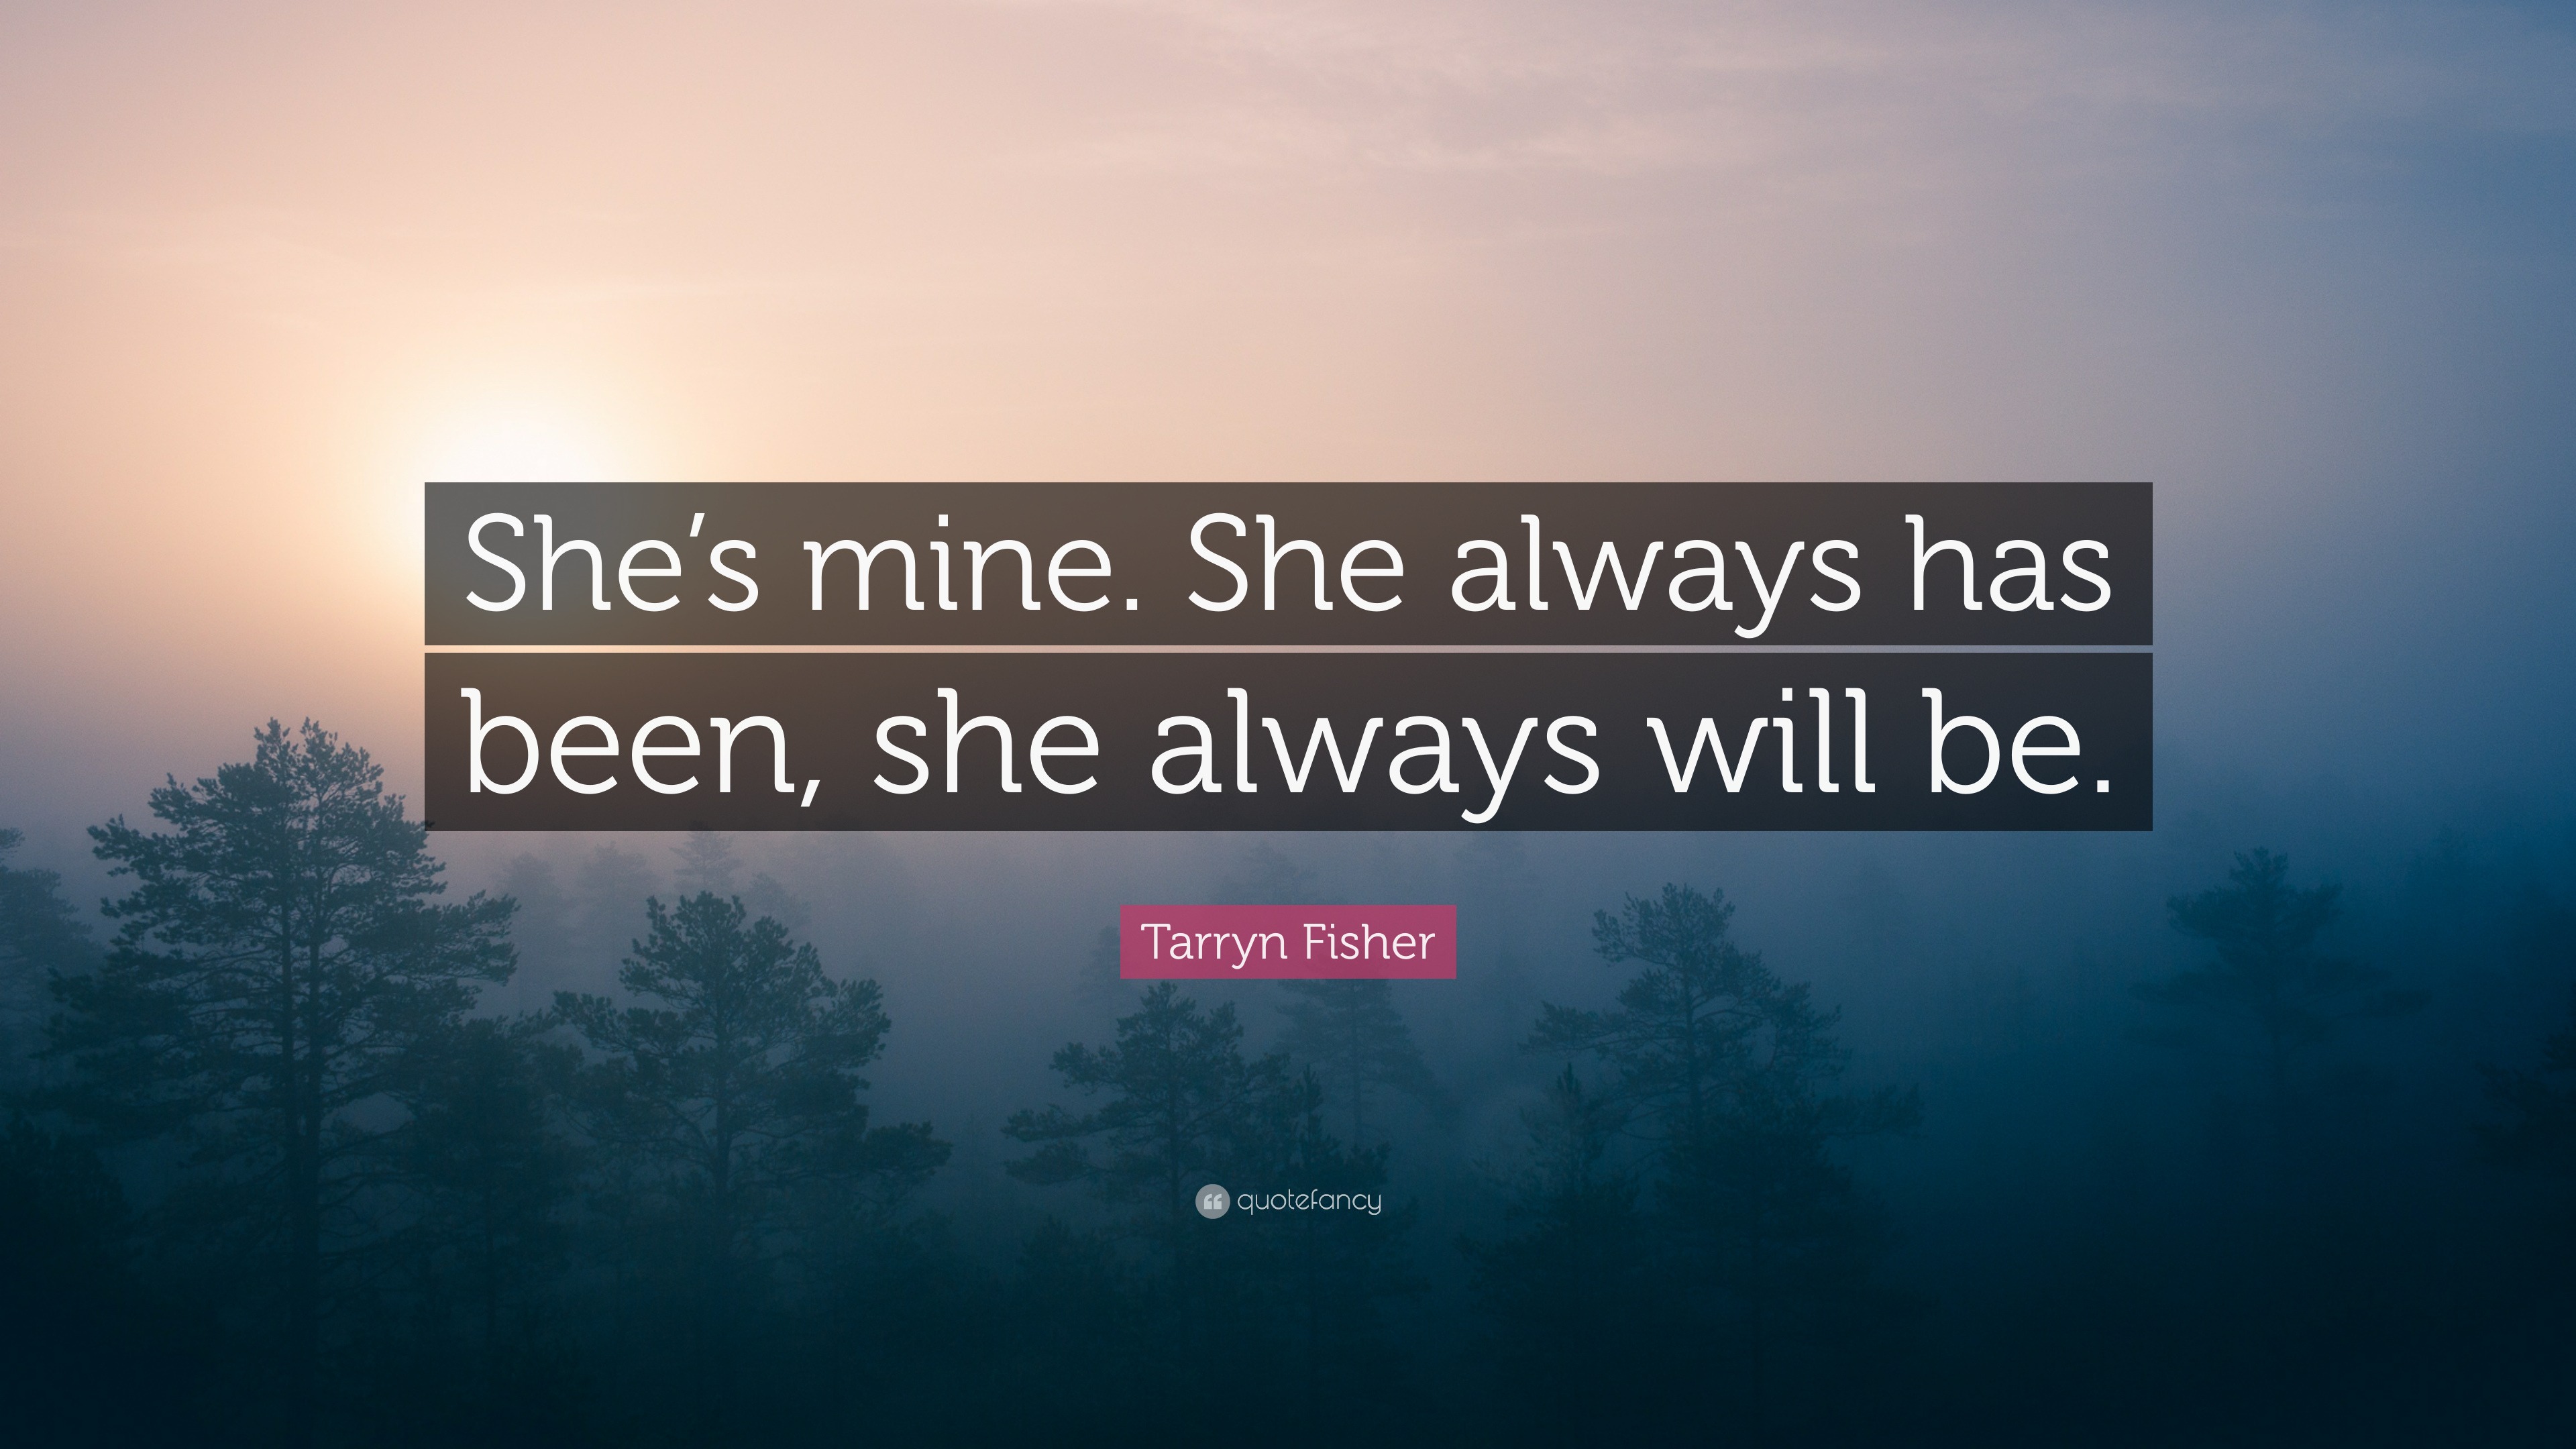 Tarryn Fisher Quote: “She’s mine. She always has been, she always will be.”